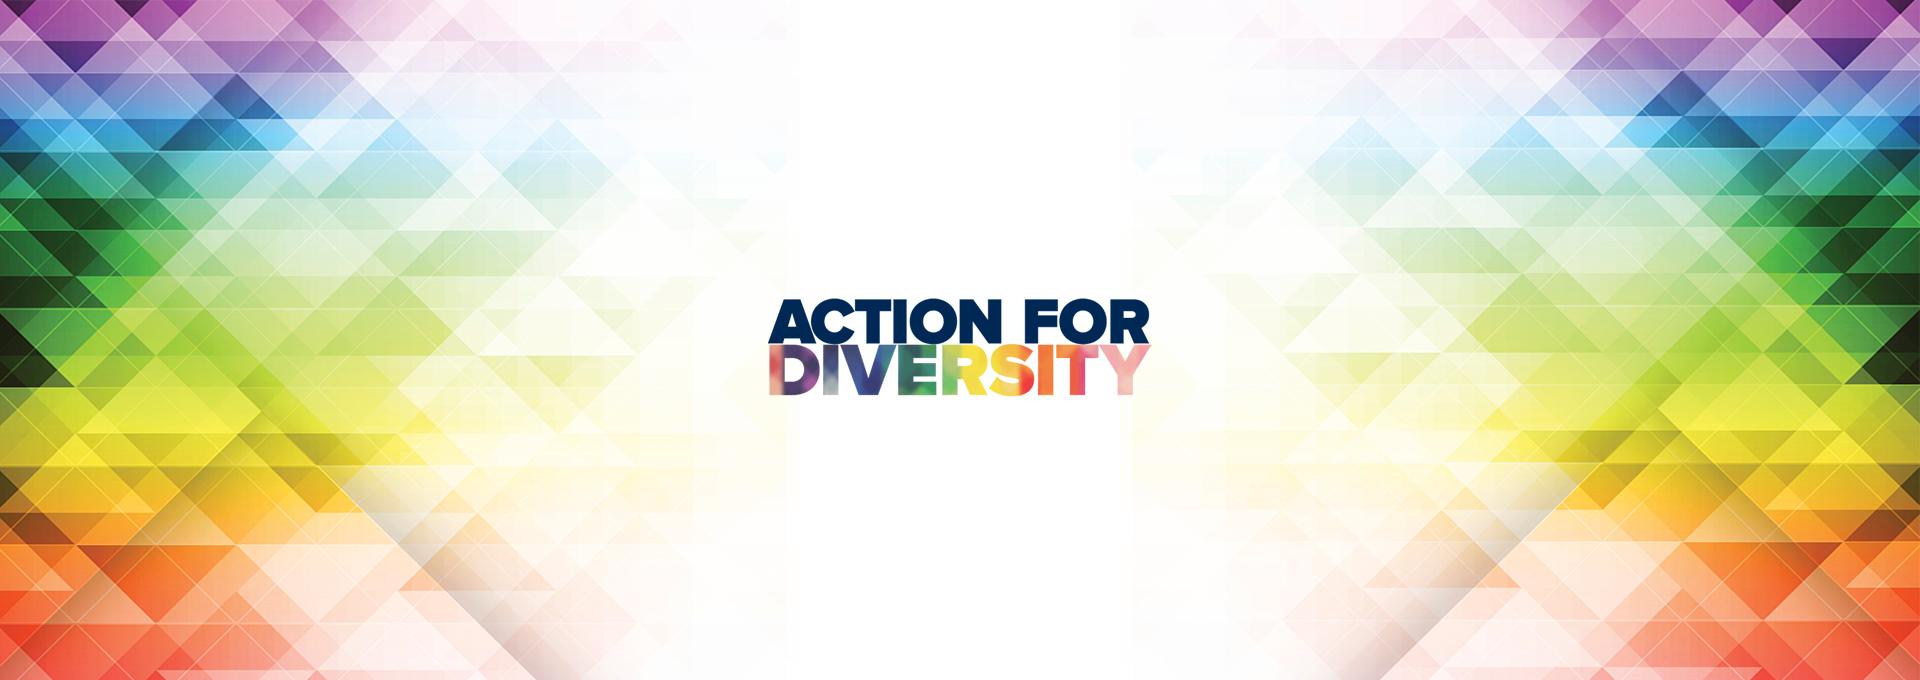 Action for Diversity Banner Image